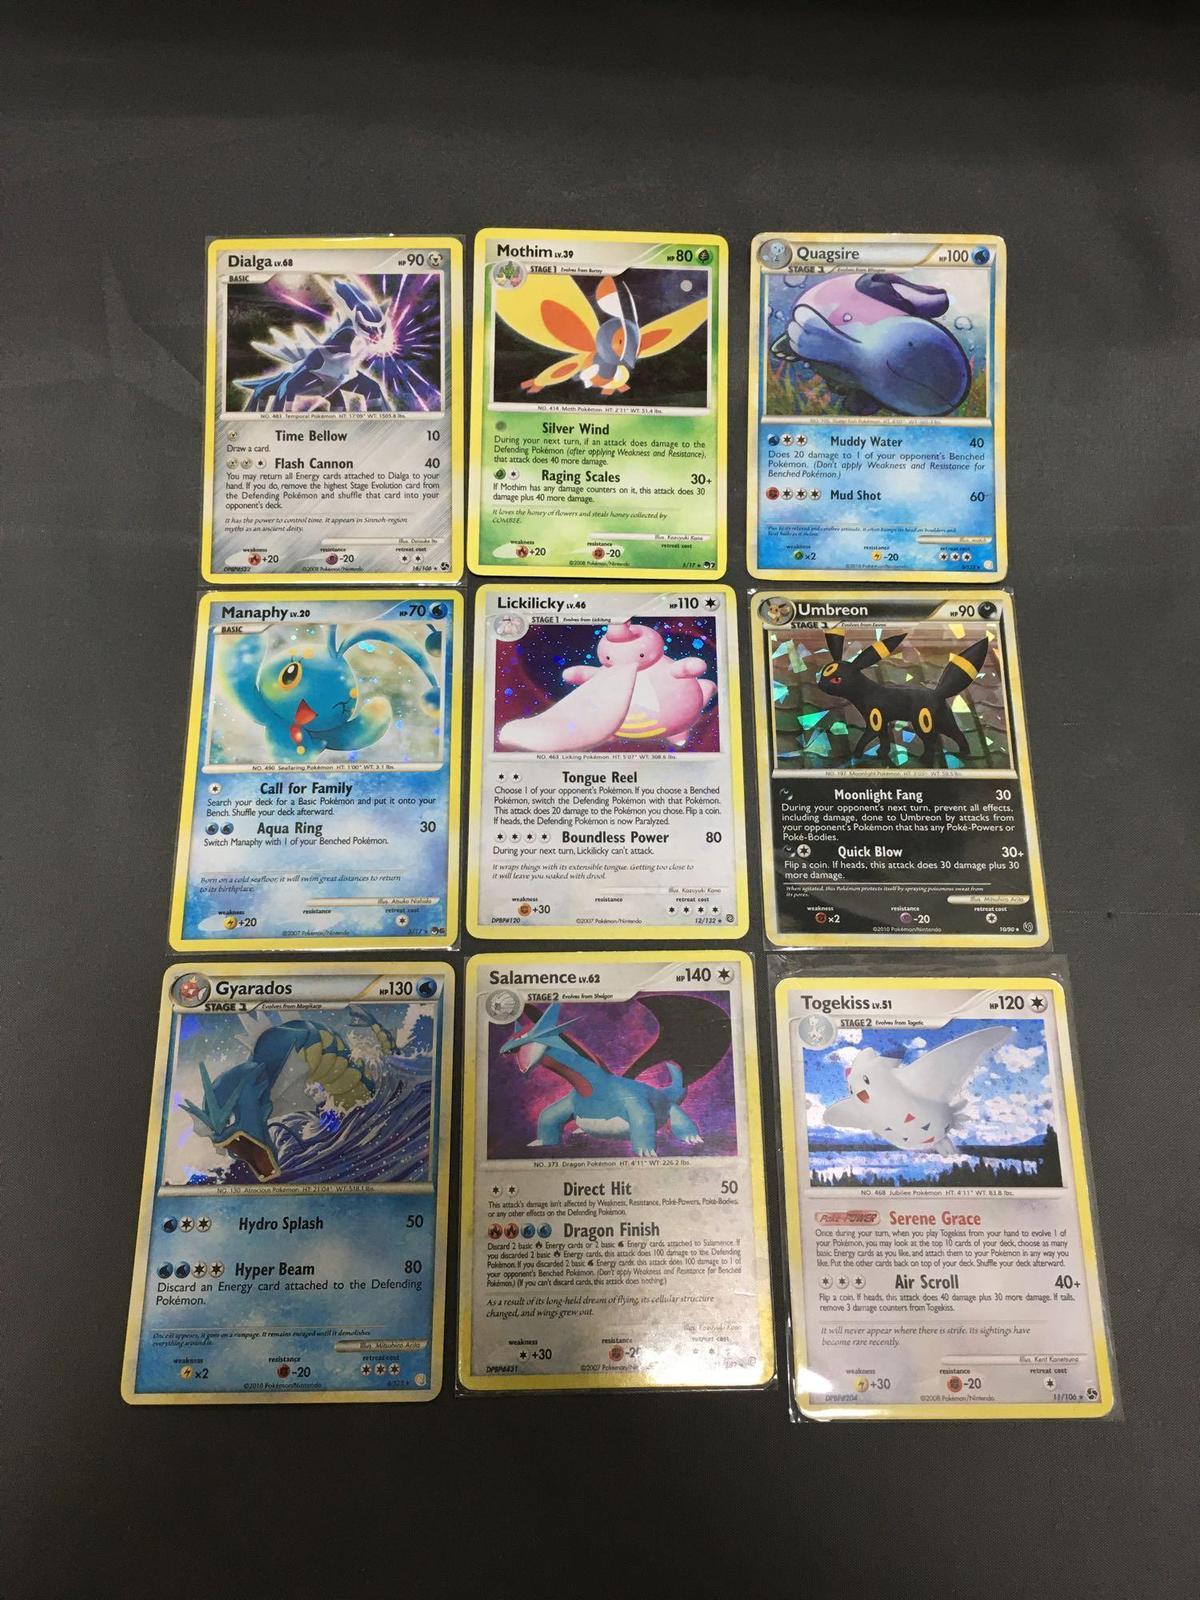 9 Card Lot of Pokemon Diamond & Pearl and HGSS Holofoil Rare Trading Cards from Binder Set